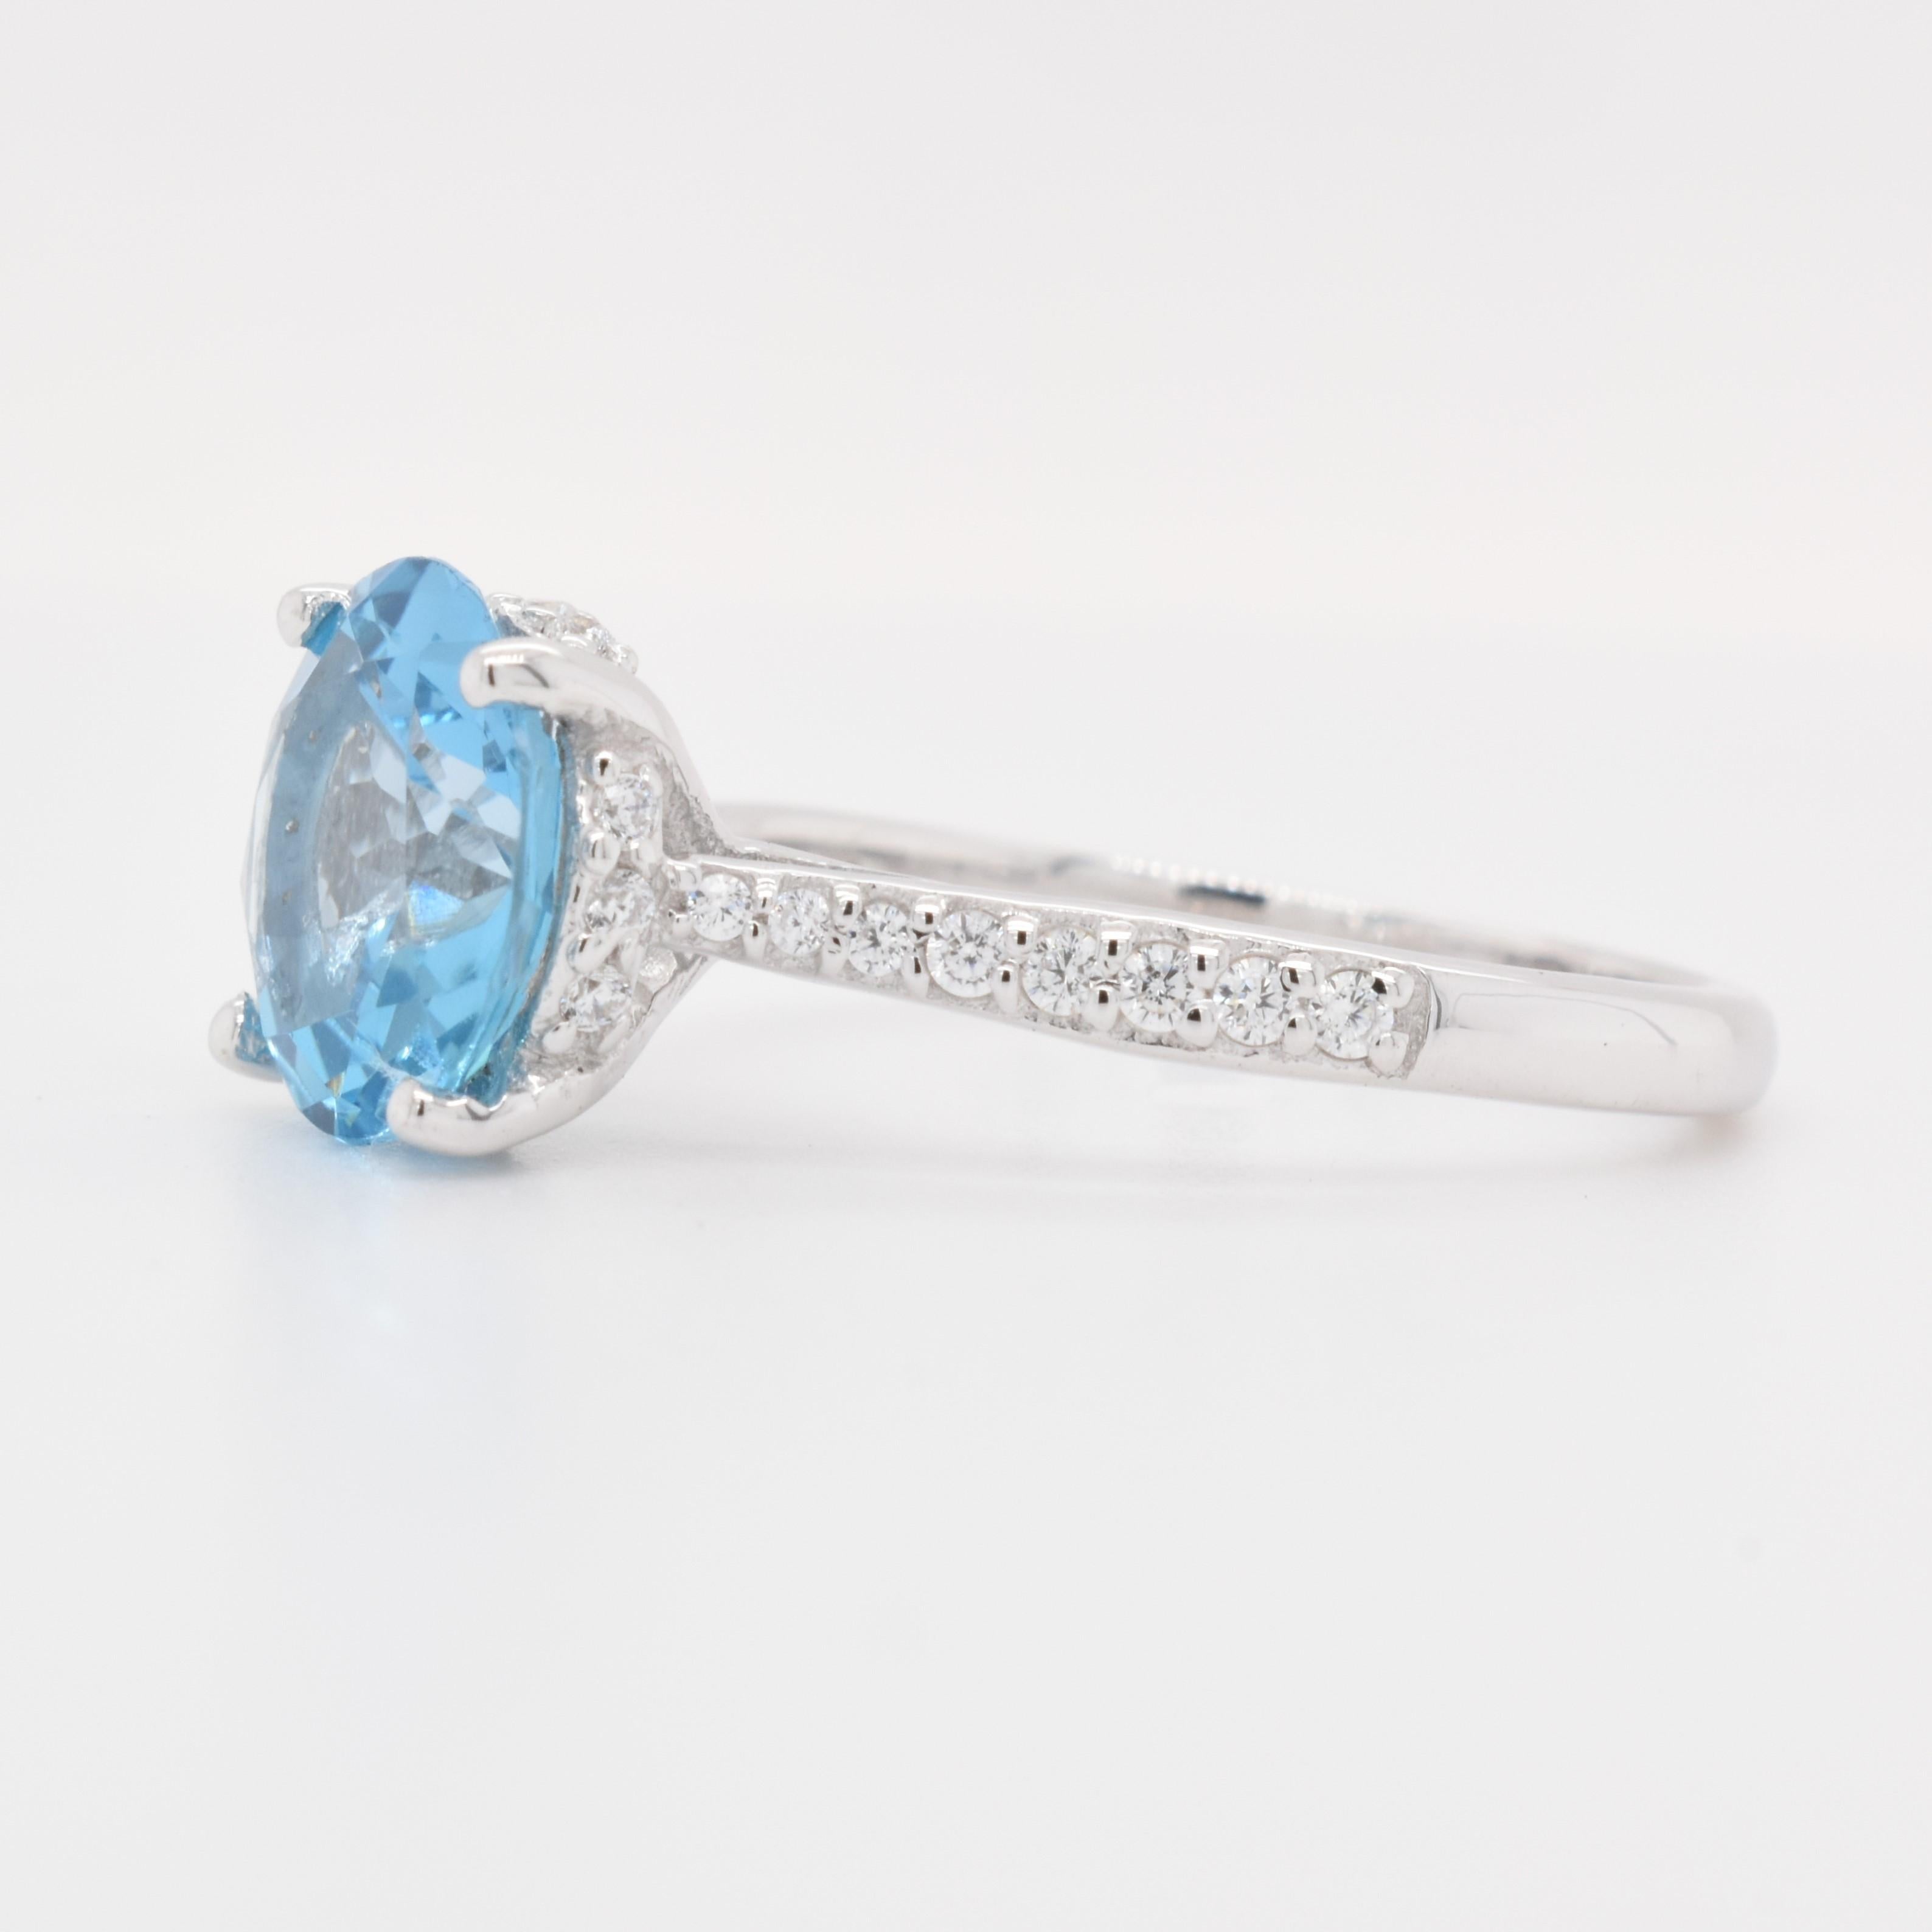 Round Shape Swiss Blue Topaz Gemstone beautifully crafted with CZ in a Ring. A fiery Blue color December Birthstone. For a special occasion like Engagement or Proposal or may be as a gift for a special person.

Primary Stone Size - 9x9mm